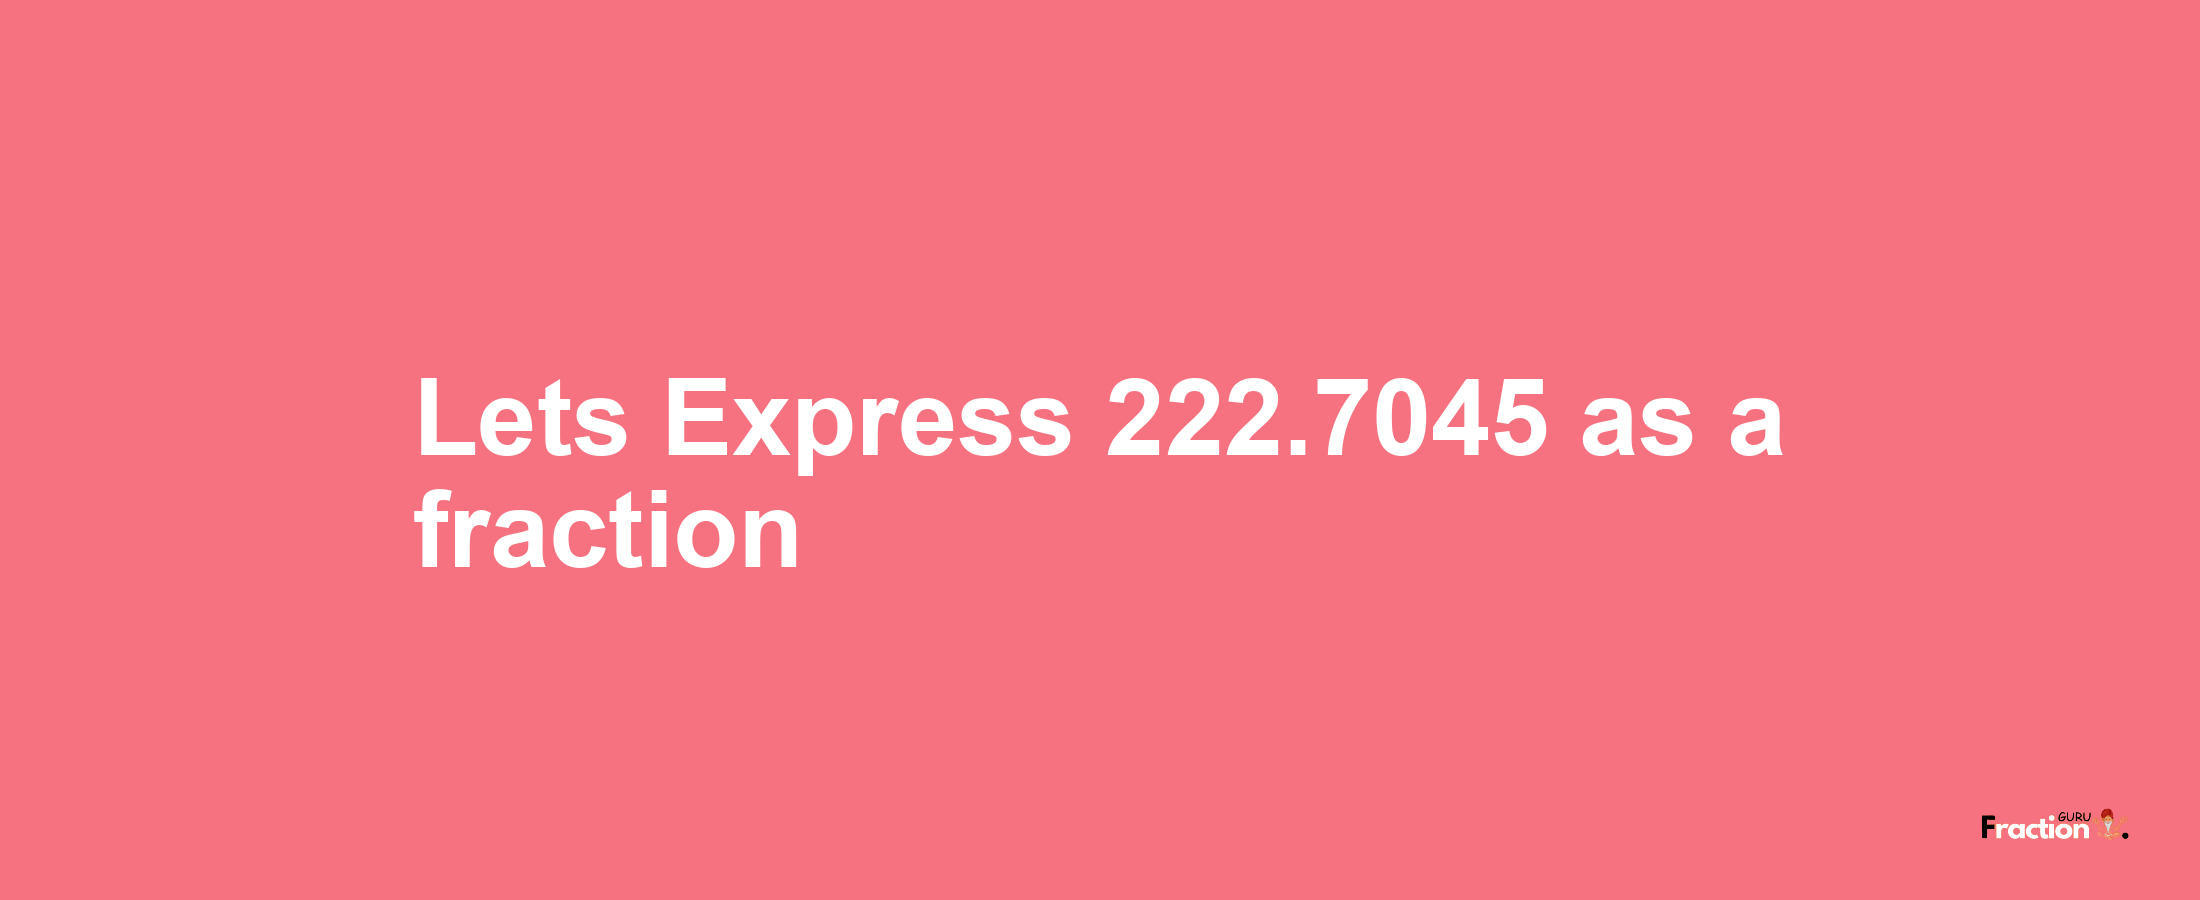 Lets Express 222.7045 as afraction